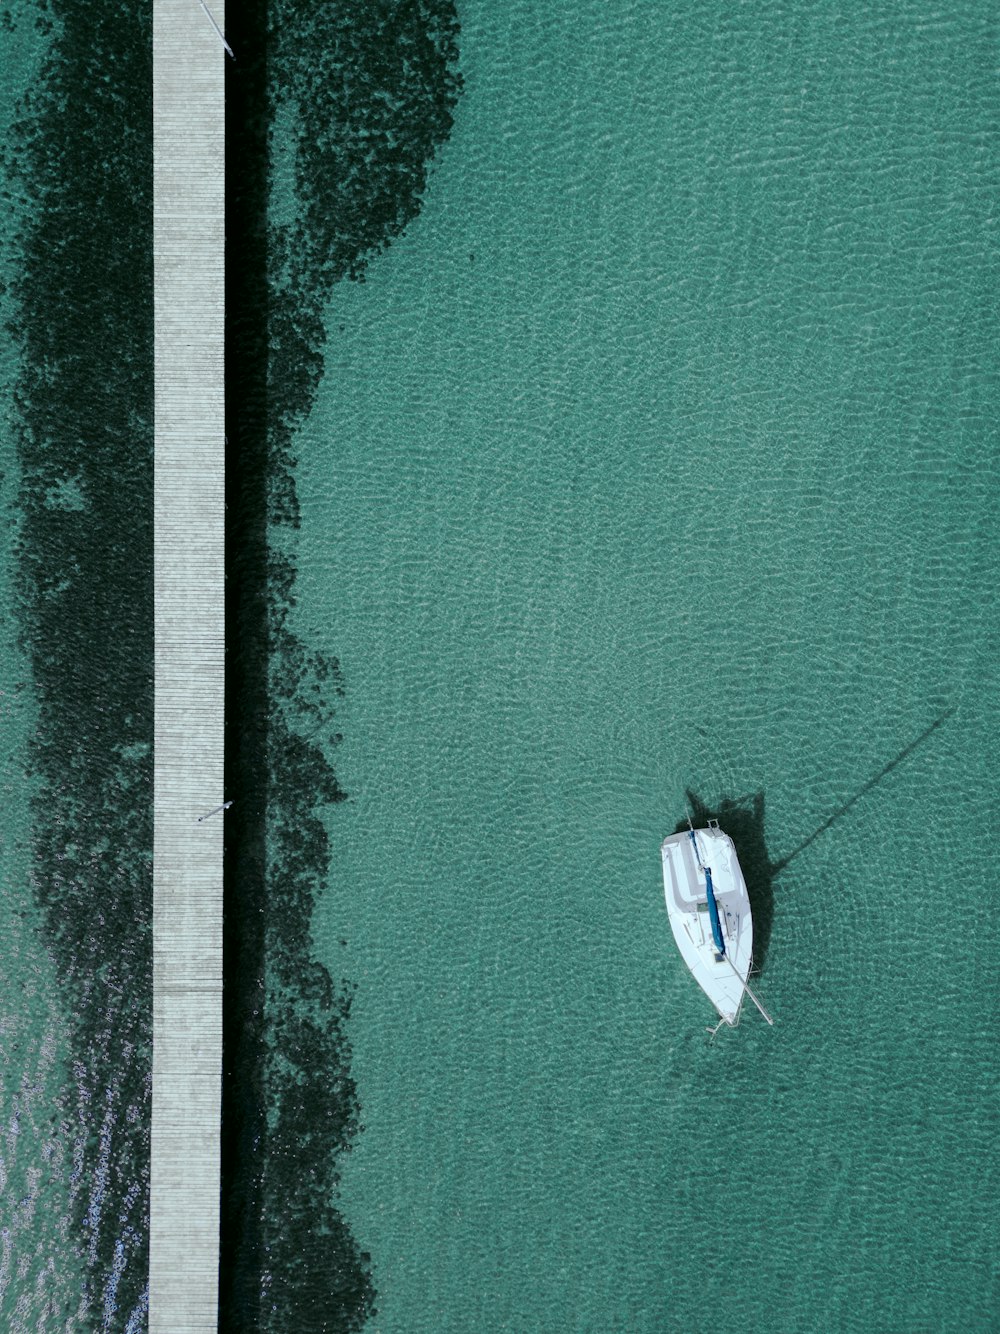 white boat in body of water during daytime